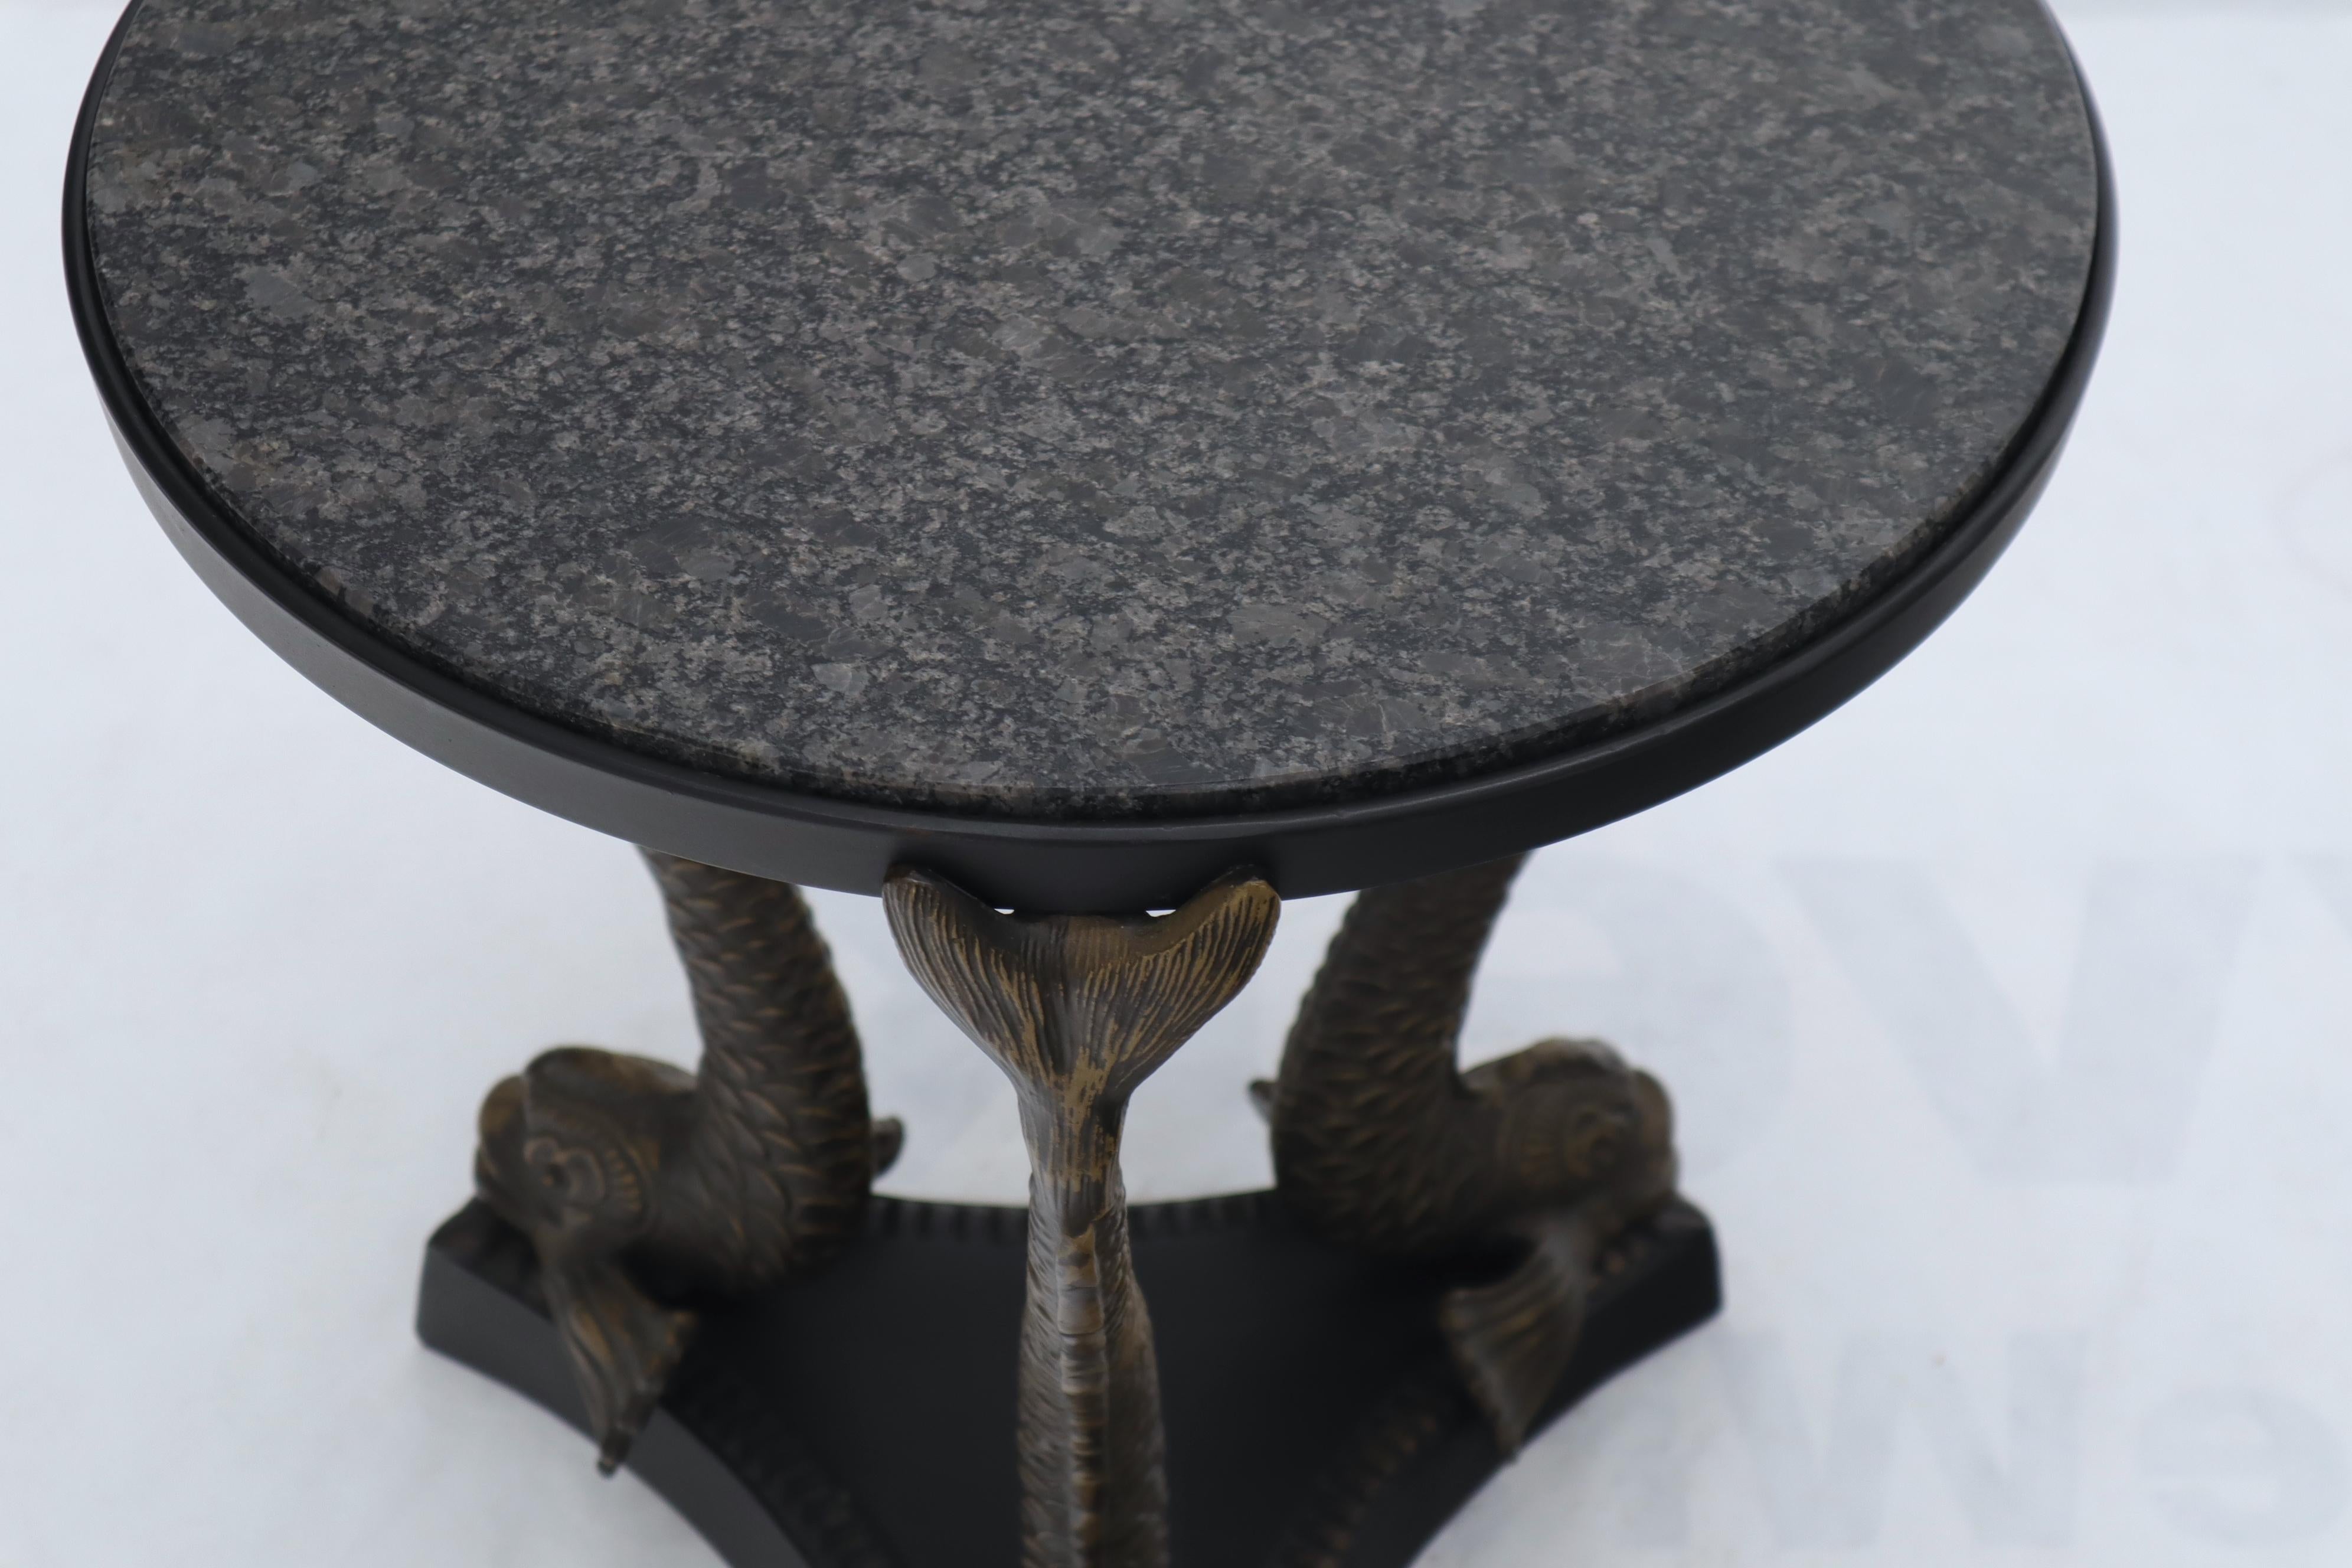 Bronze Triple Dolphins Base Granite Top Round Side End Table Pedestal In Excellent Condition For Sale In Rockaway, NJ